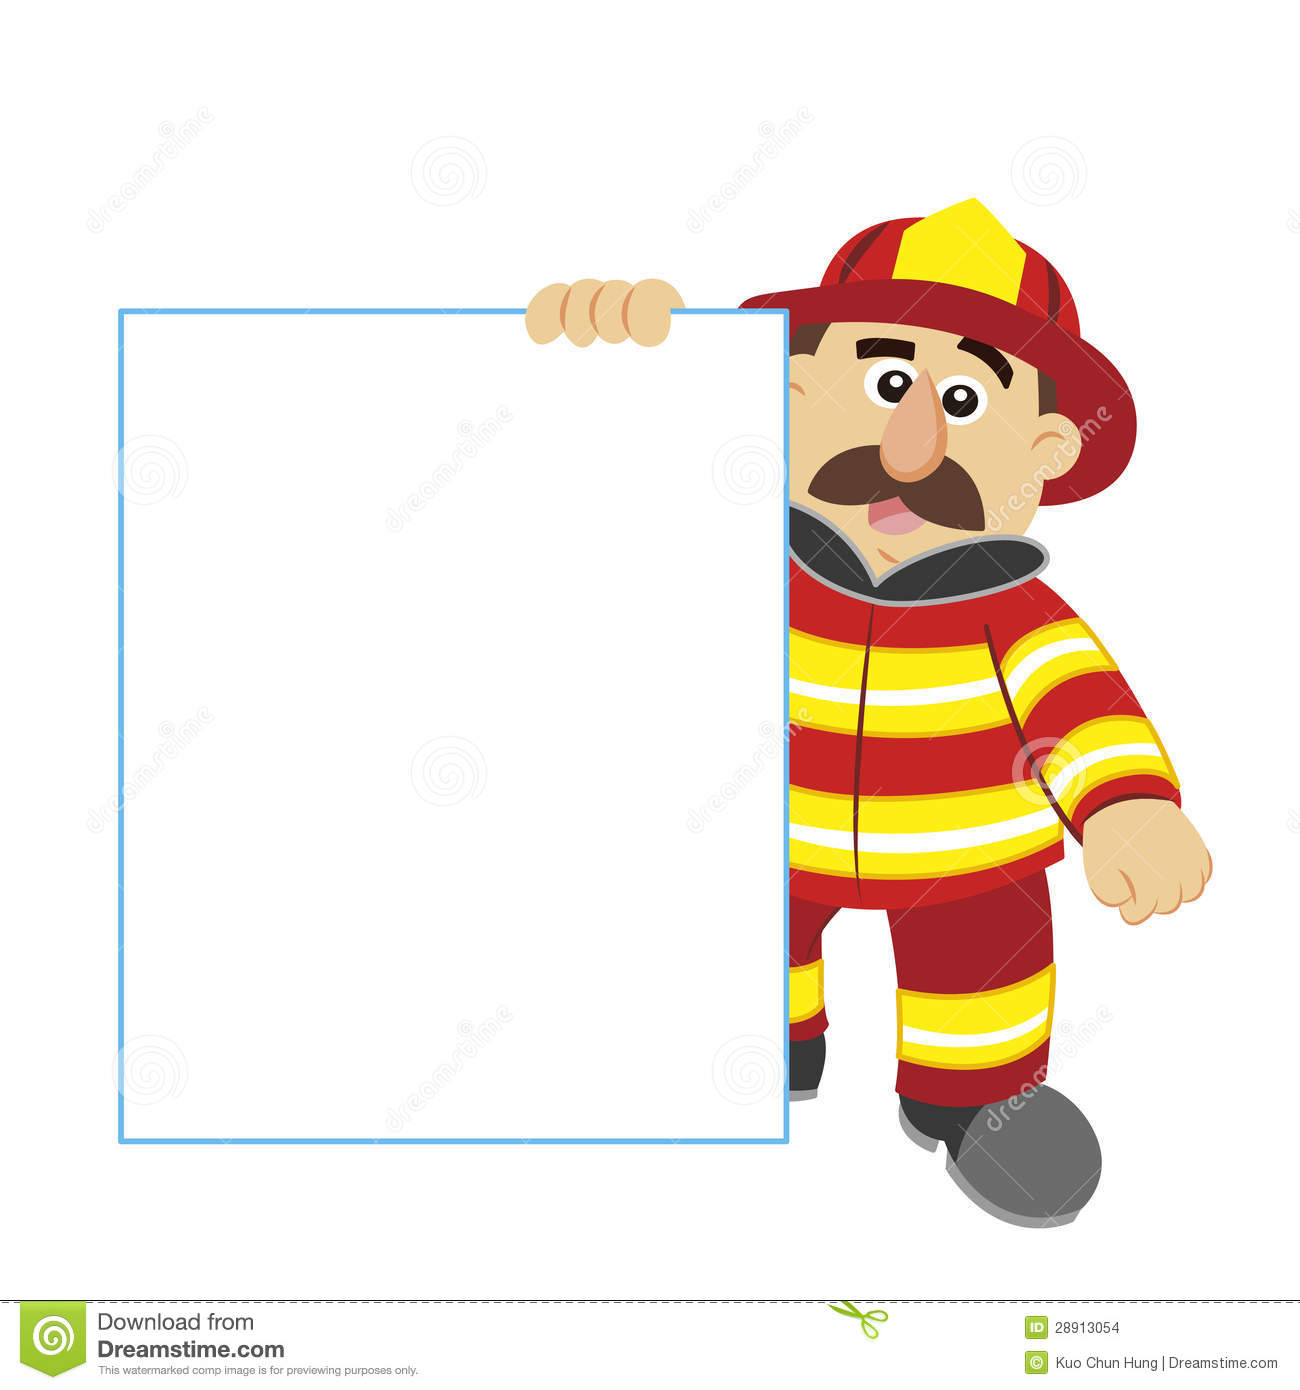 Firefighter Hat Cartoon   Clipart Panda   Free Clipart Images